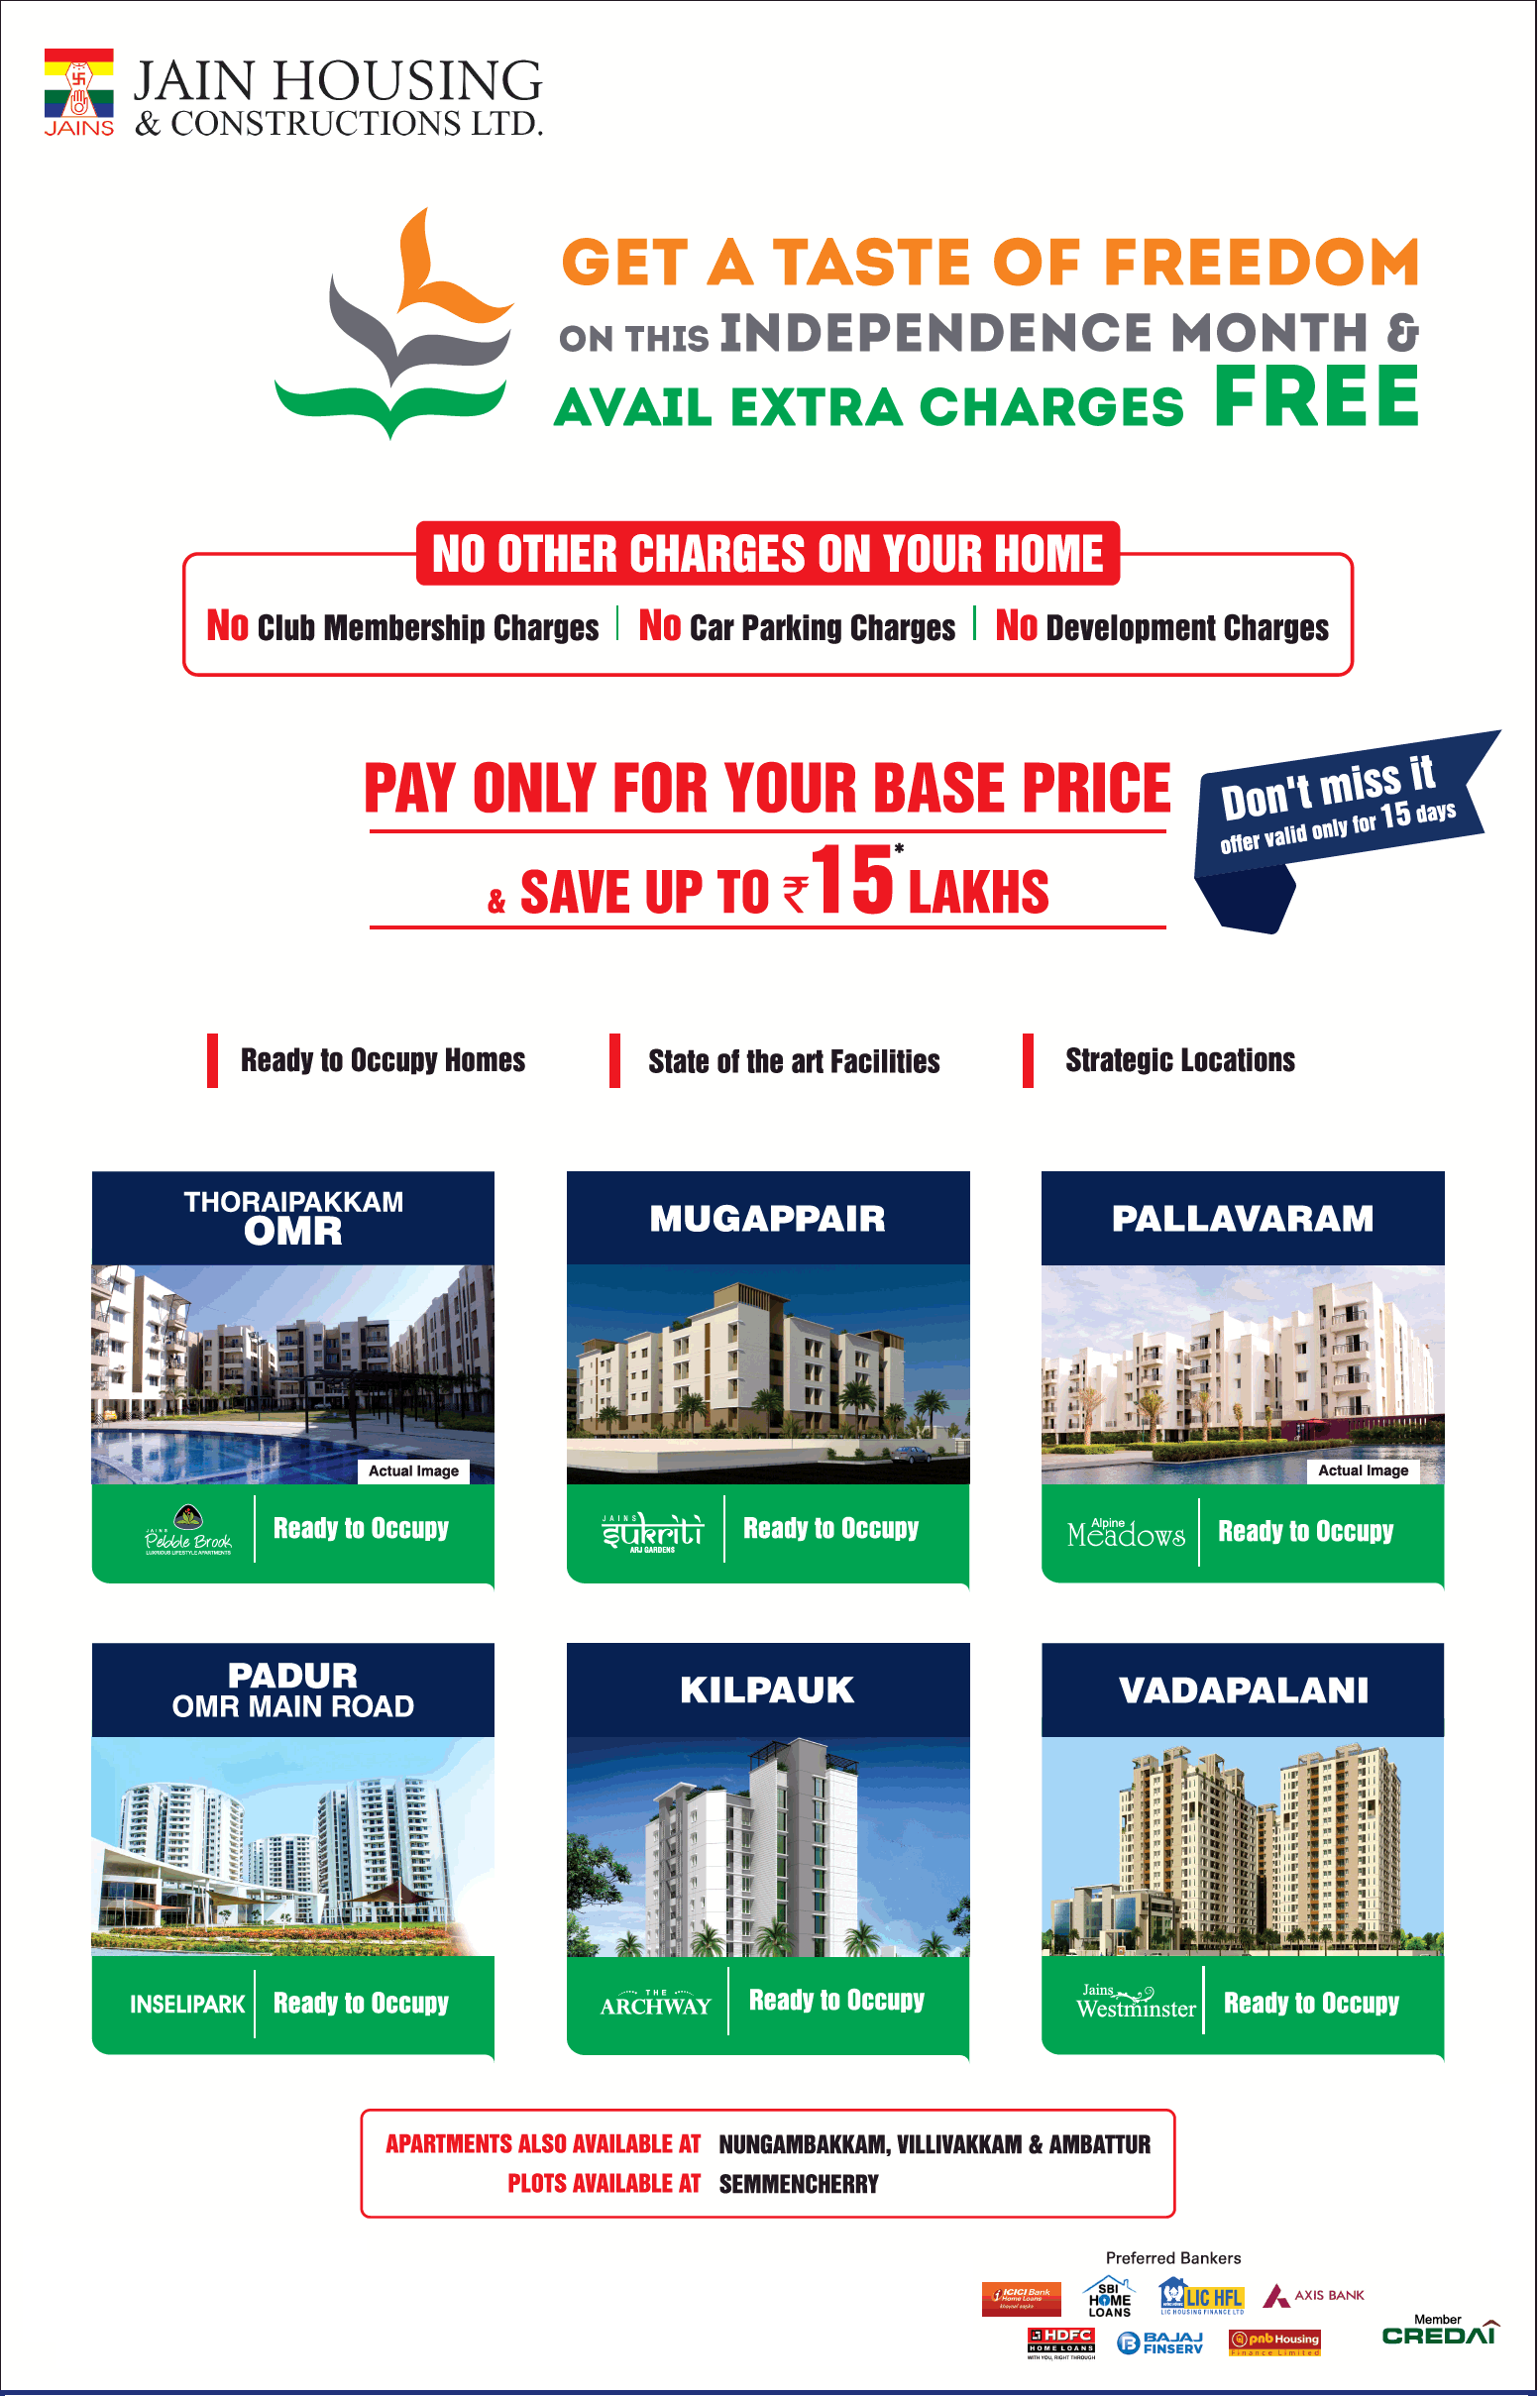 Get a taste of freedom on this independence month at Jain Housing, Chennai Update